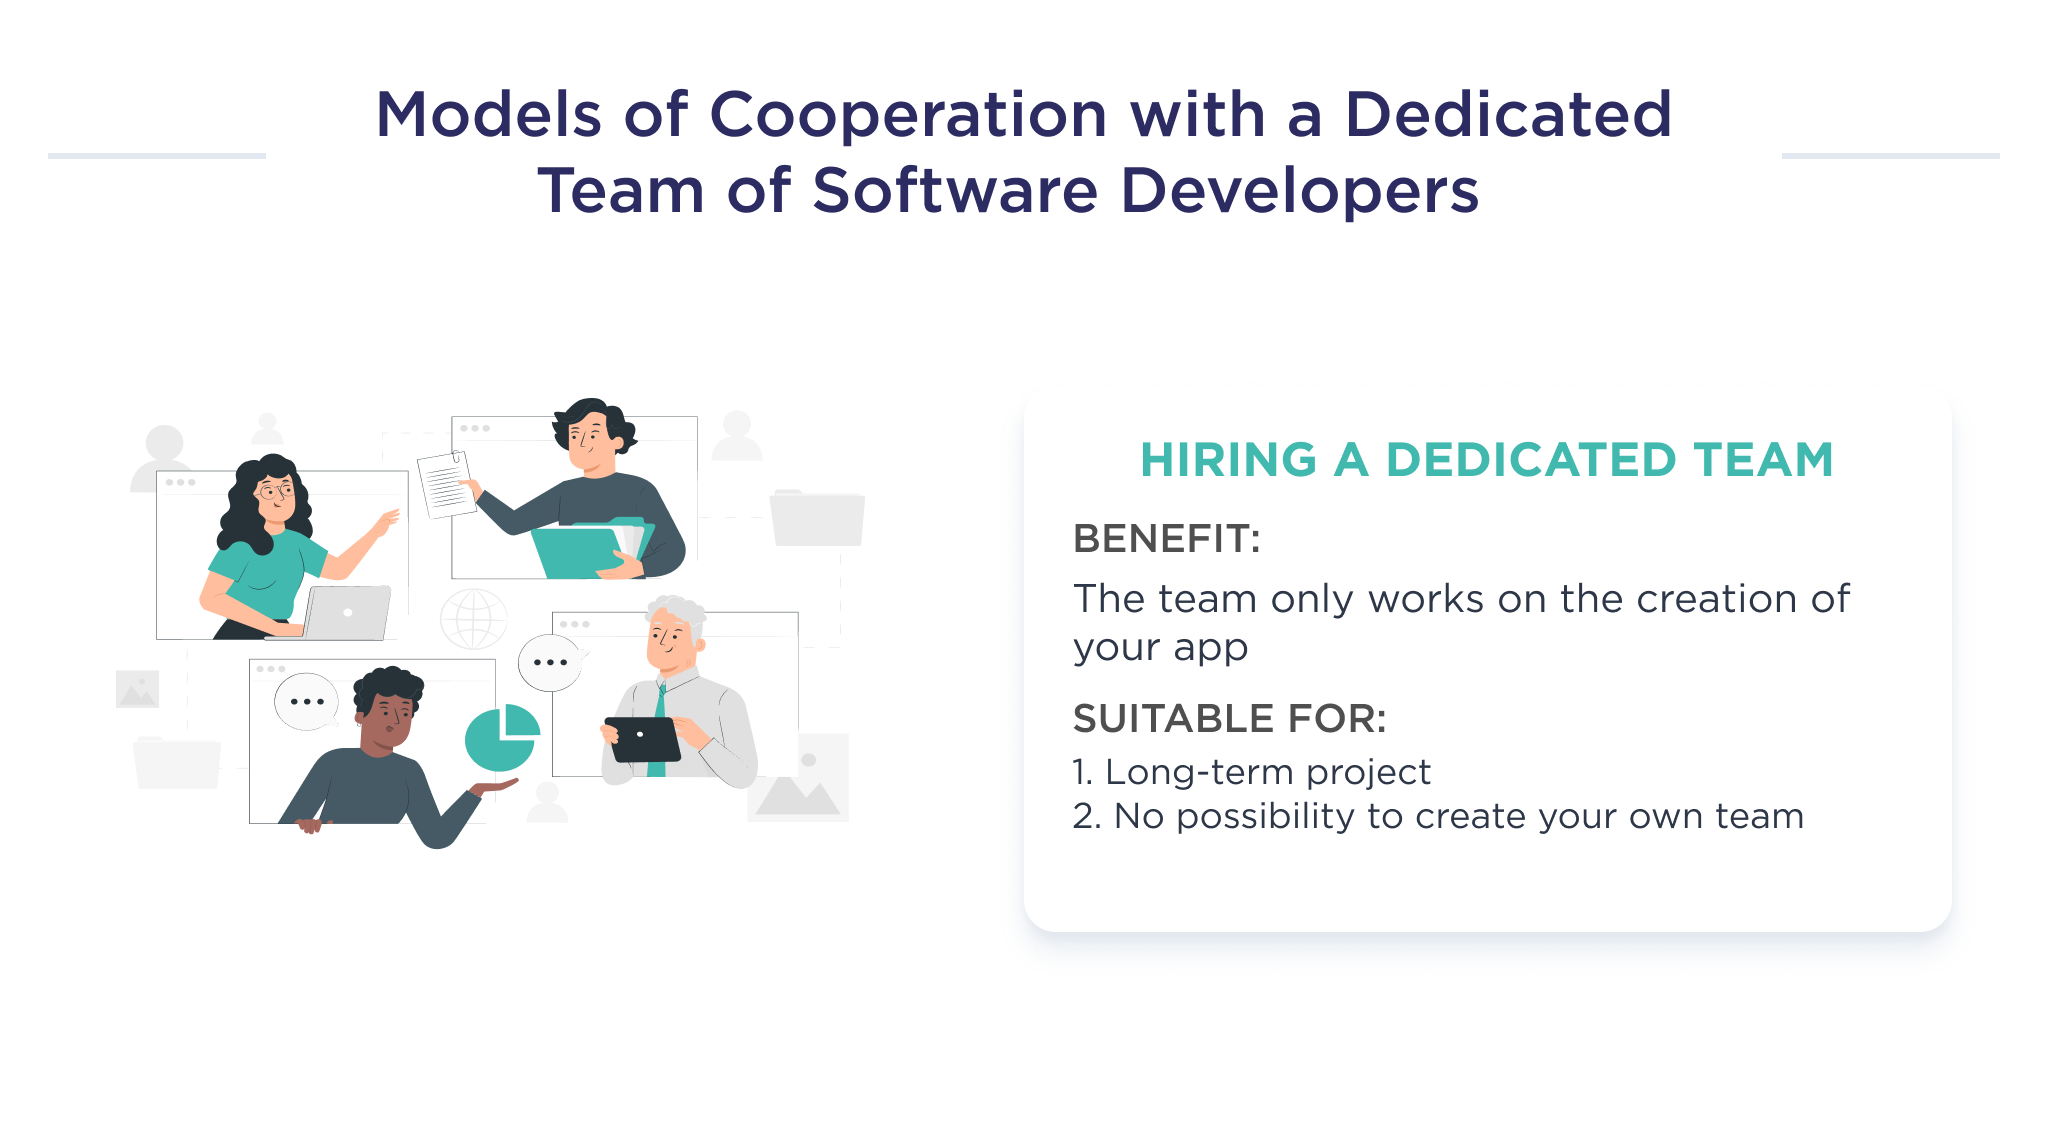 One of the models of cooperation with a dedicated team of software developers namely, hiring dedicated software development team